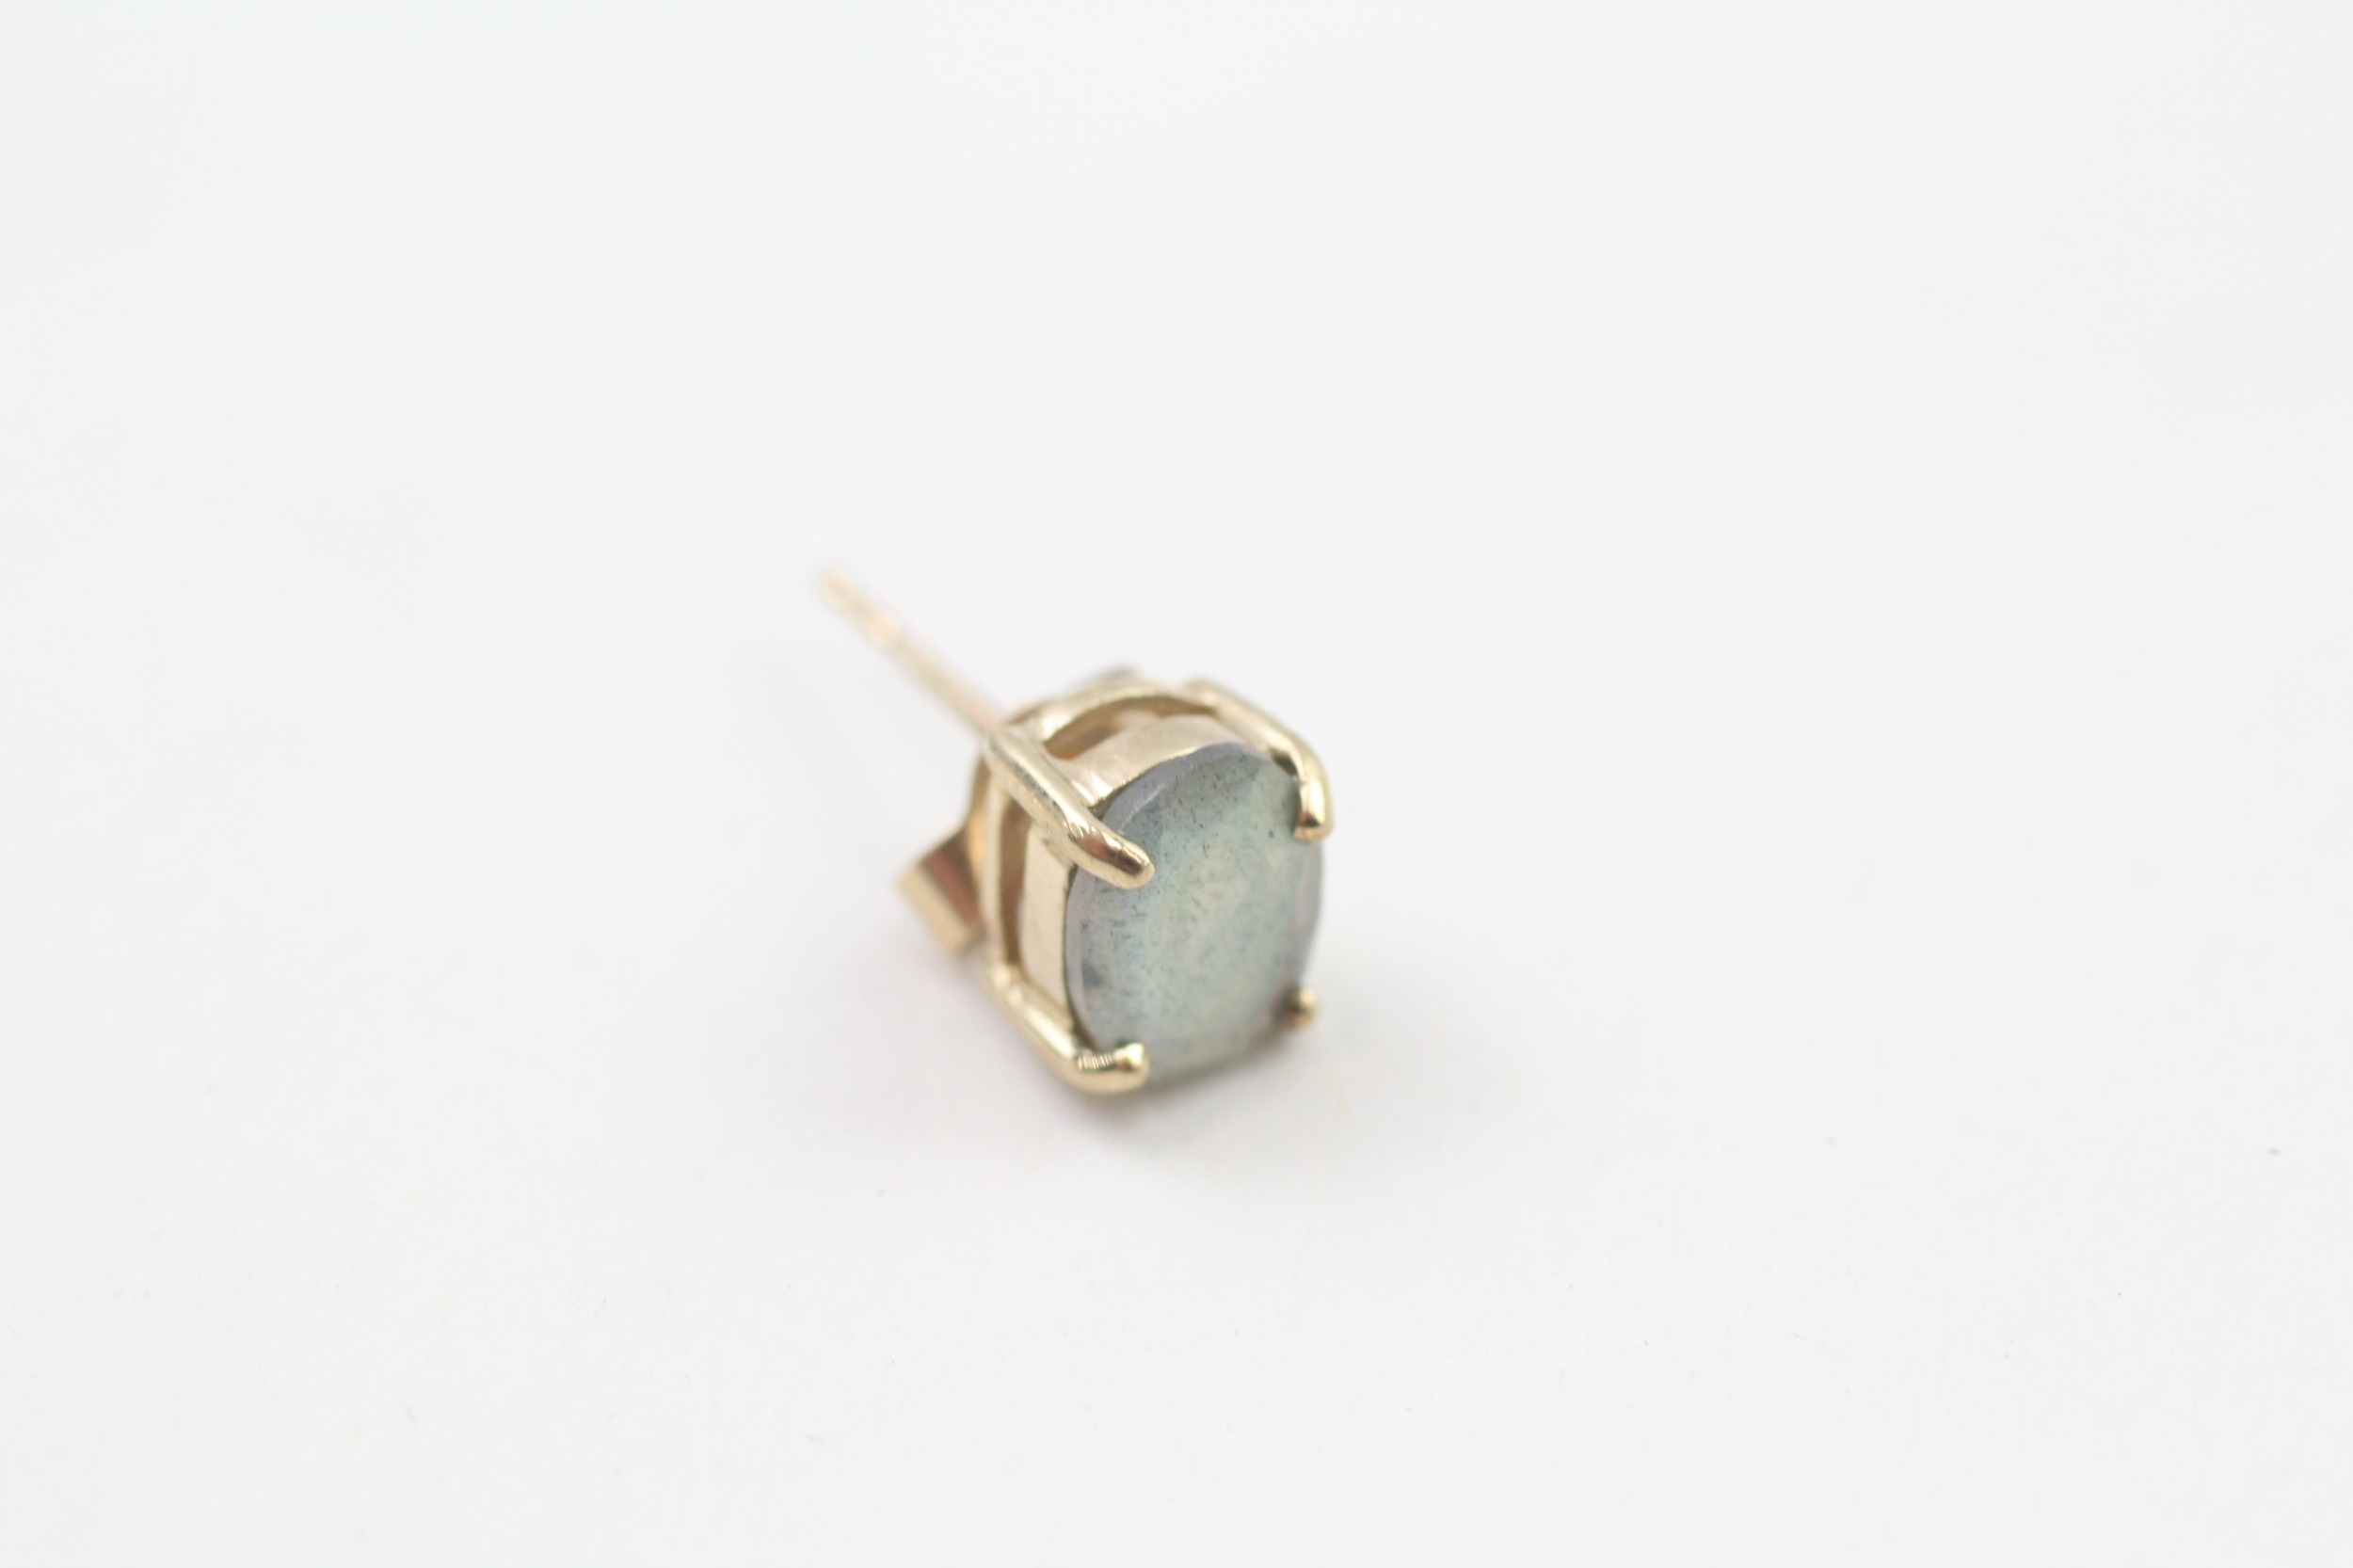 9ct gold labradorite stud earrings with scroll backs (1.5g) - Image 2 of 4